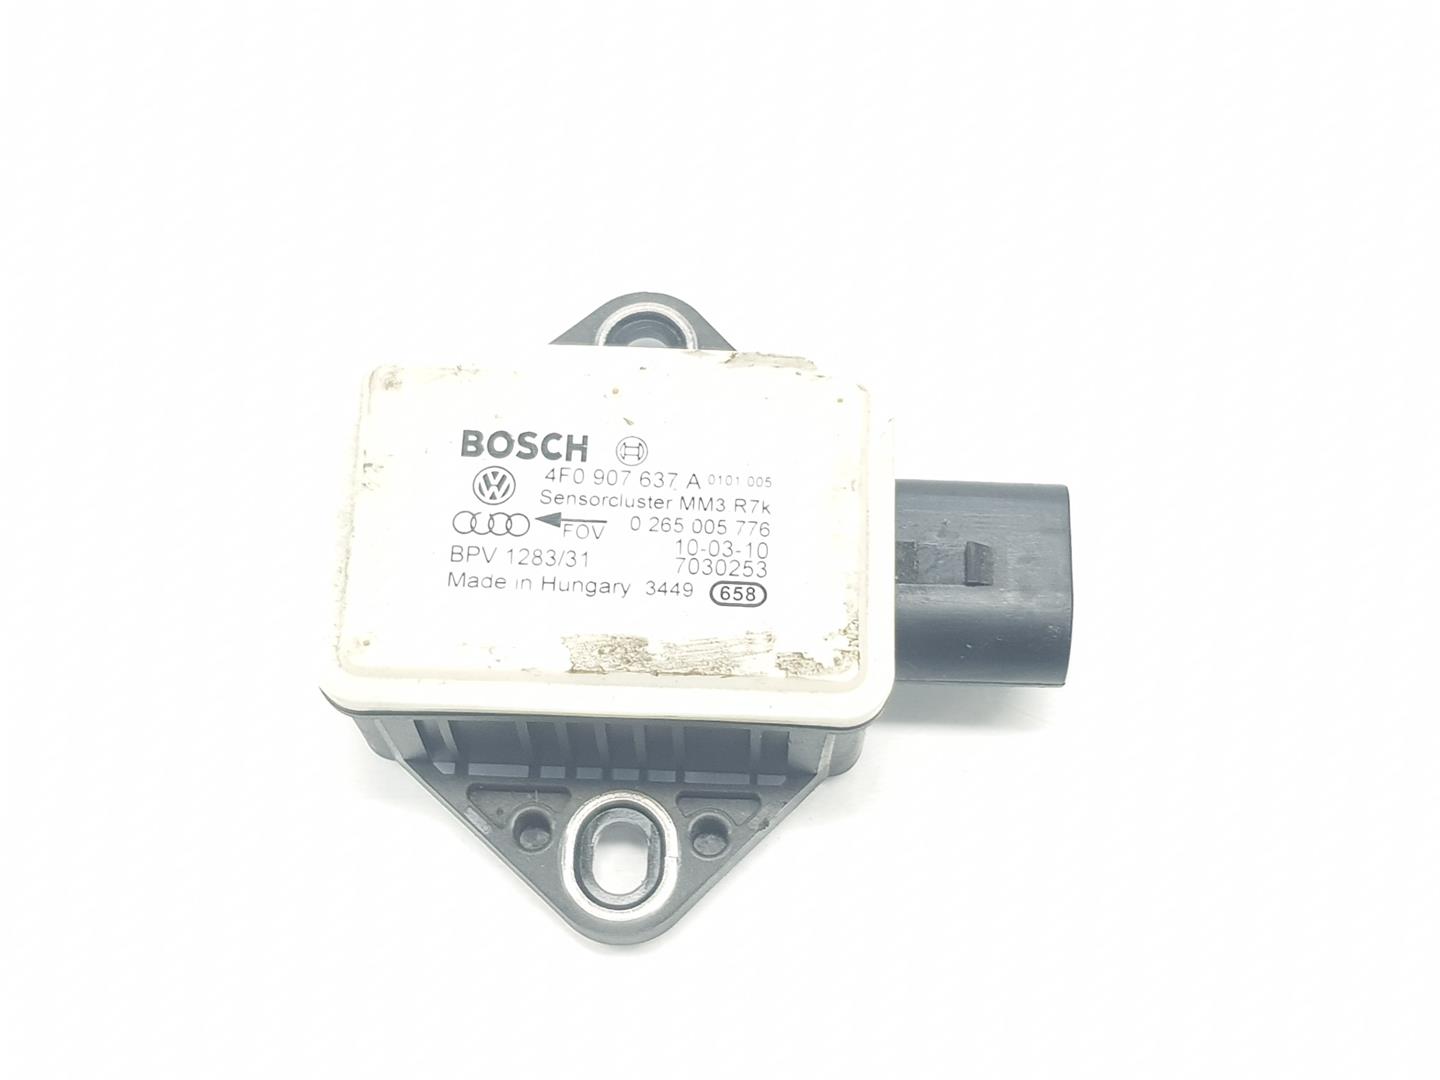 SEAT Exeo 1 generation (2009-2012) Other Control Units 4F0907637A, 4F0907637A 24232127